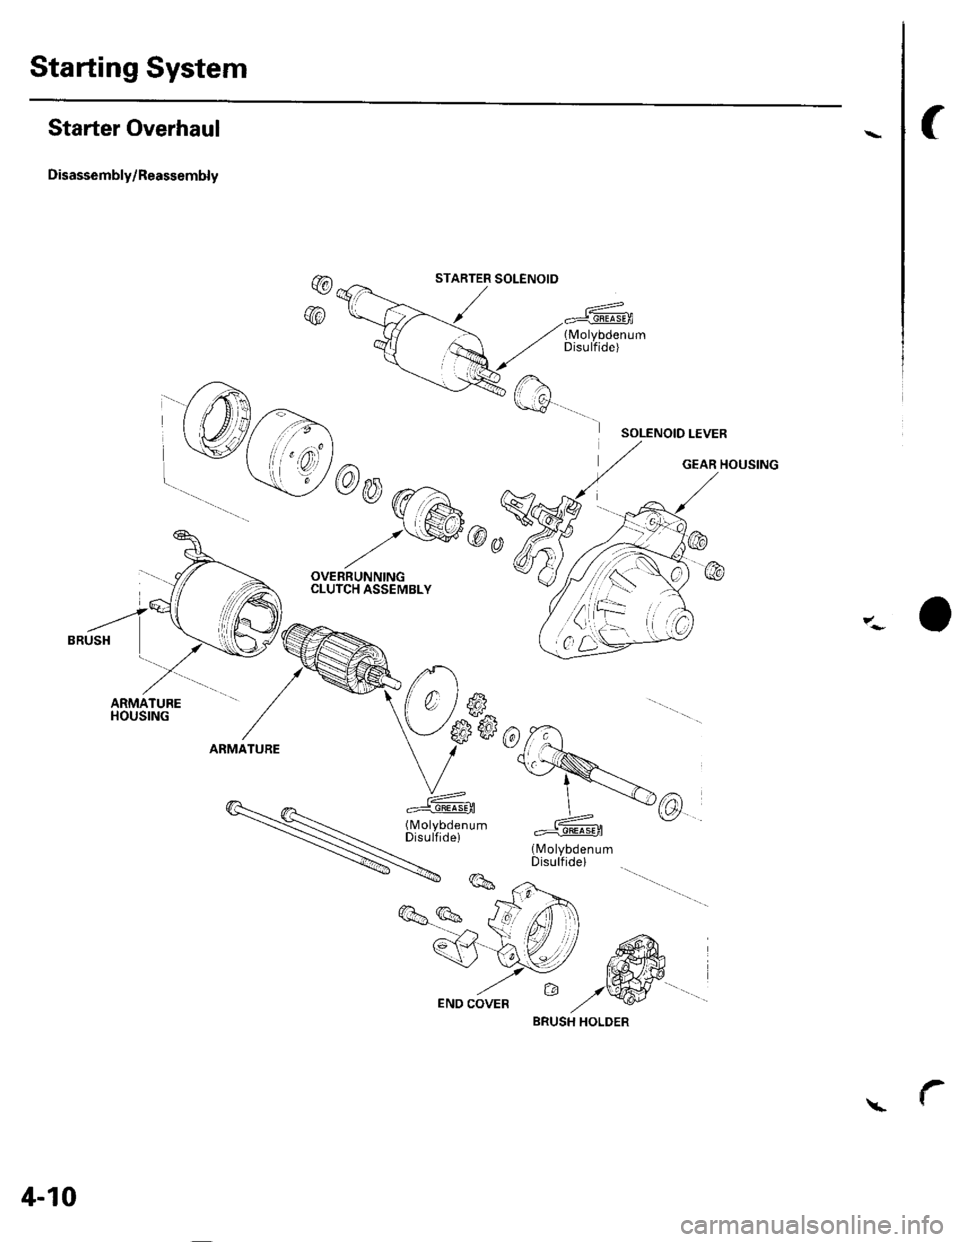 HONDA CIVIC 2003 7.G Service Manual Starting System
Starter Overhaul
Disassembly/Reassembly
f
@
@
,-- ----_2<-
; ,/ 1(-\
rw.h
\:!@a
- 
@-A
q -z\hsc6
b-.- ,"OVERRUNNINGCLUTCH ASSEMBLY
G
SOLENOID LEVER
o*"lu*. 
V*rN*
\#. A*@
 c^)* -#""Jli